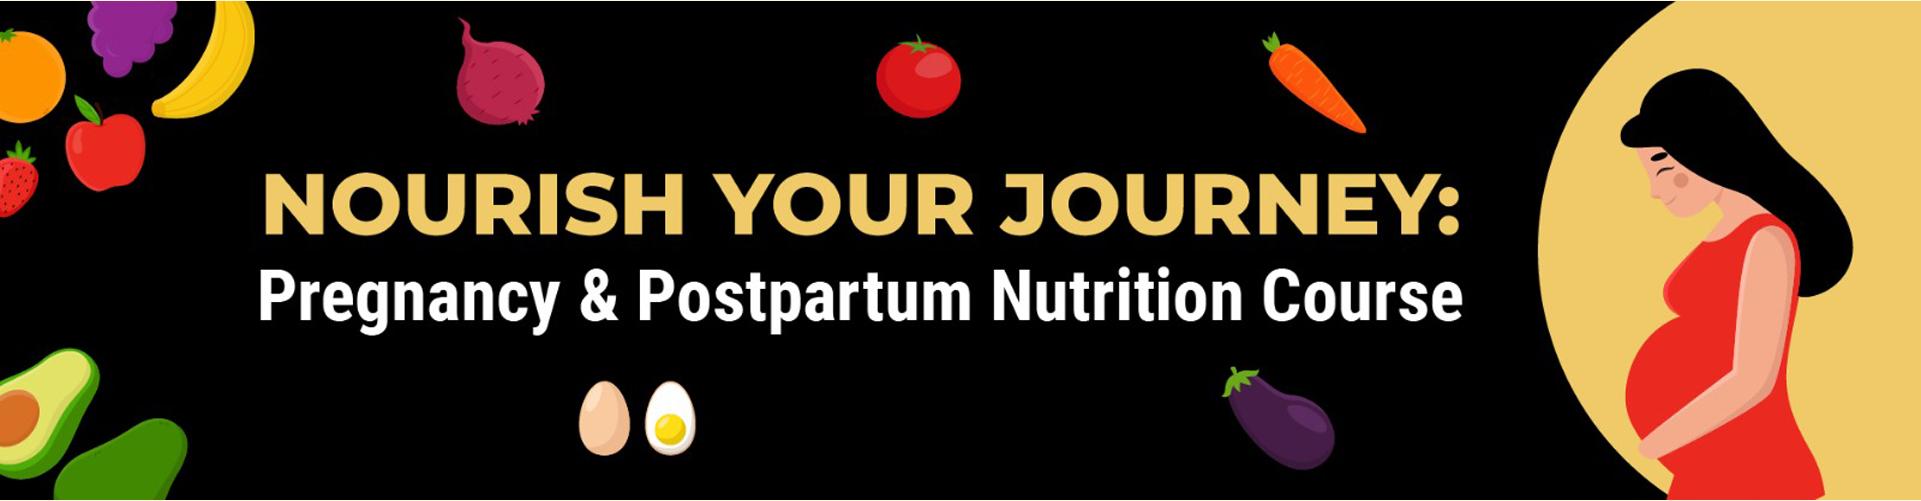 Pregnancy & Postpartum Nutrition and Fitness Course